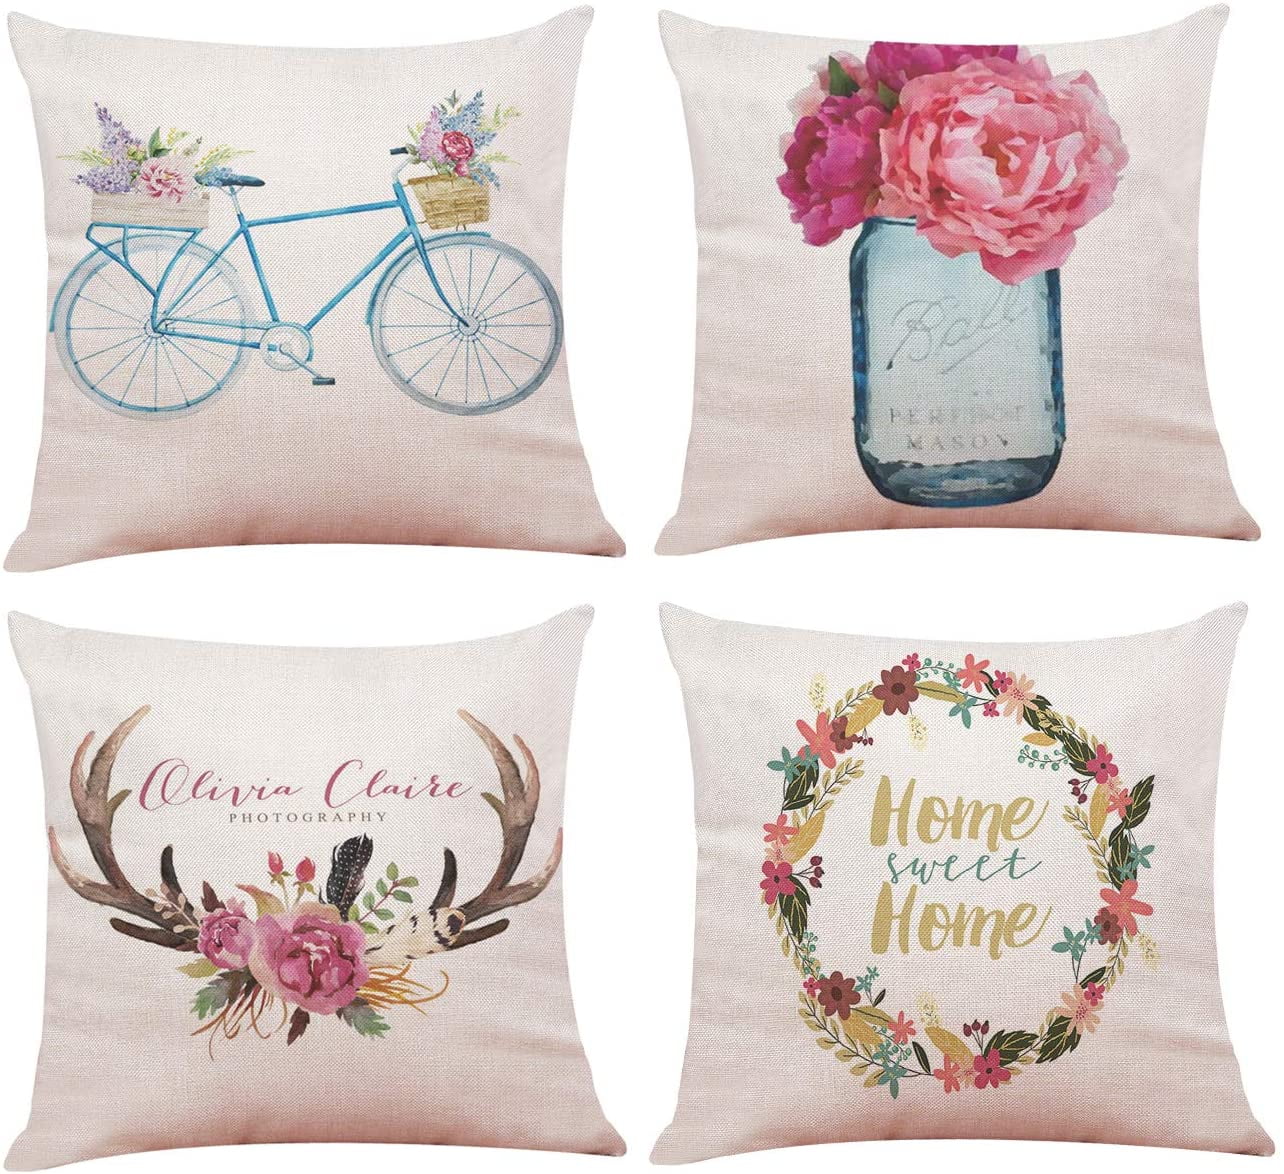 Spring Pillow Covers Spring Throw Pillows Live Life in Full Bloom #3 Pillow Cover Spring Decorations Throw Pillow